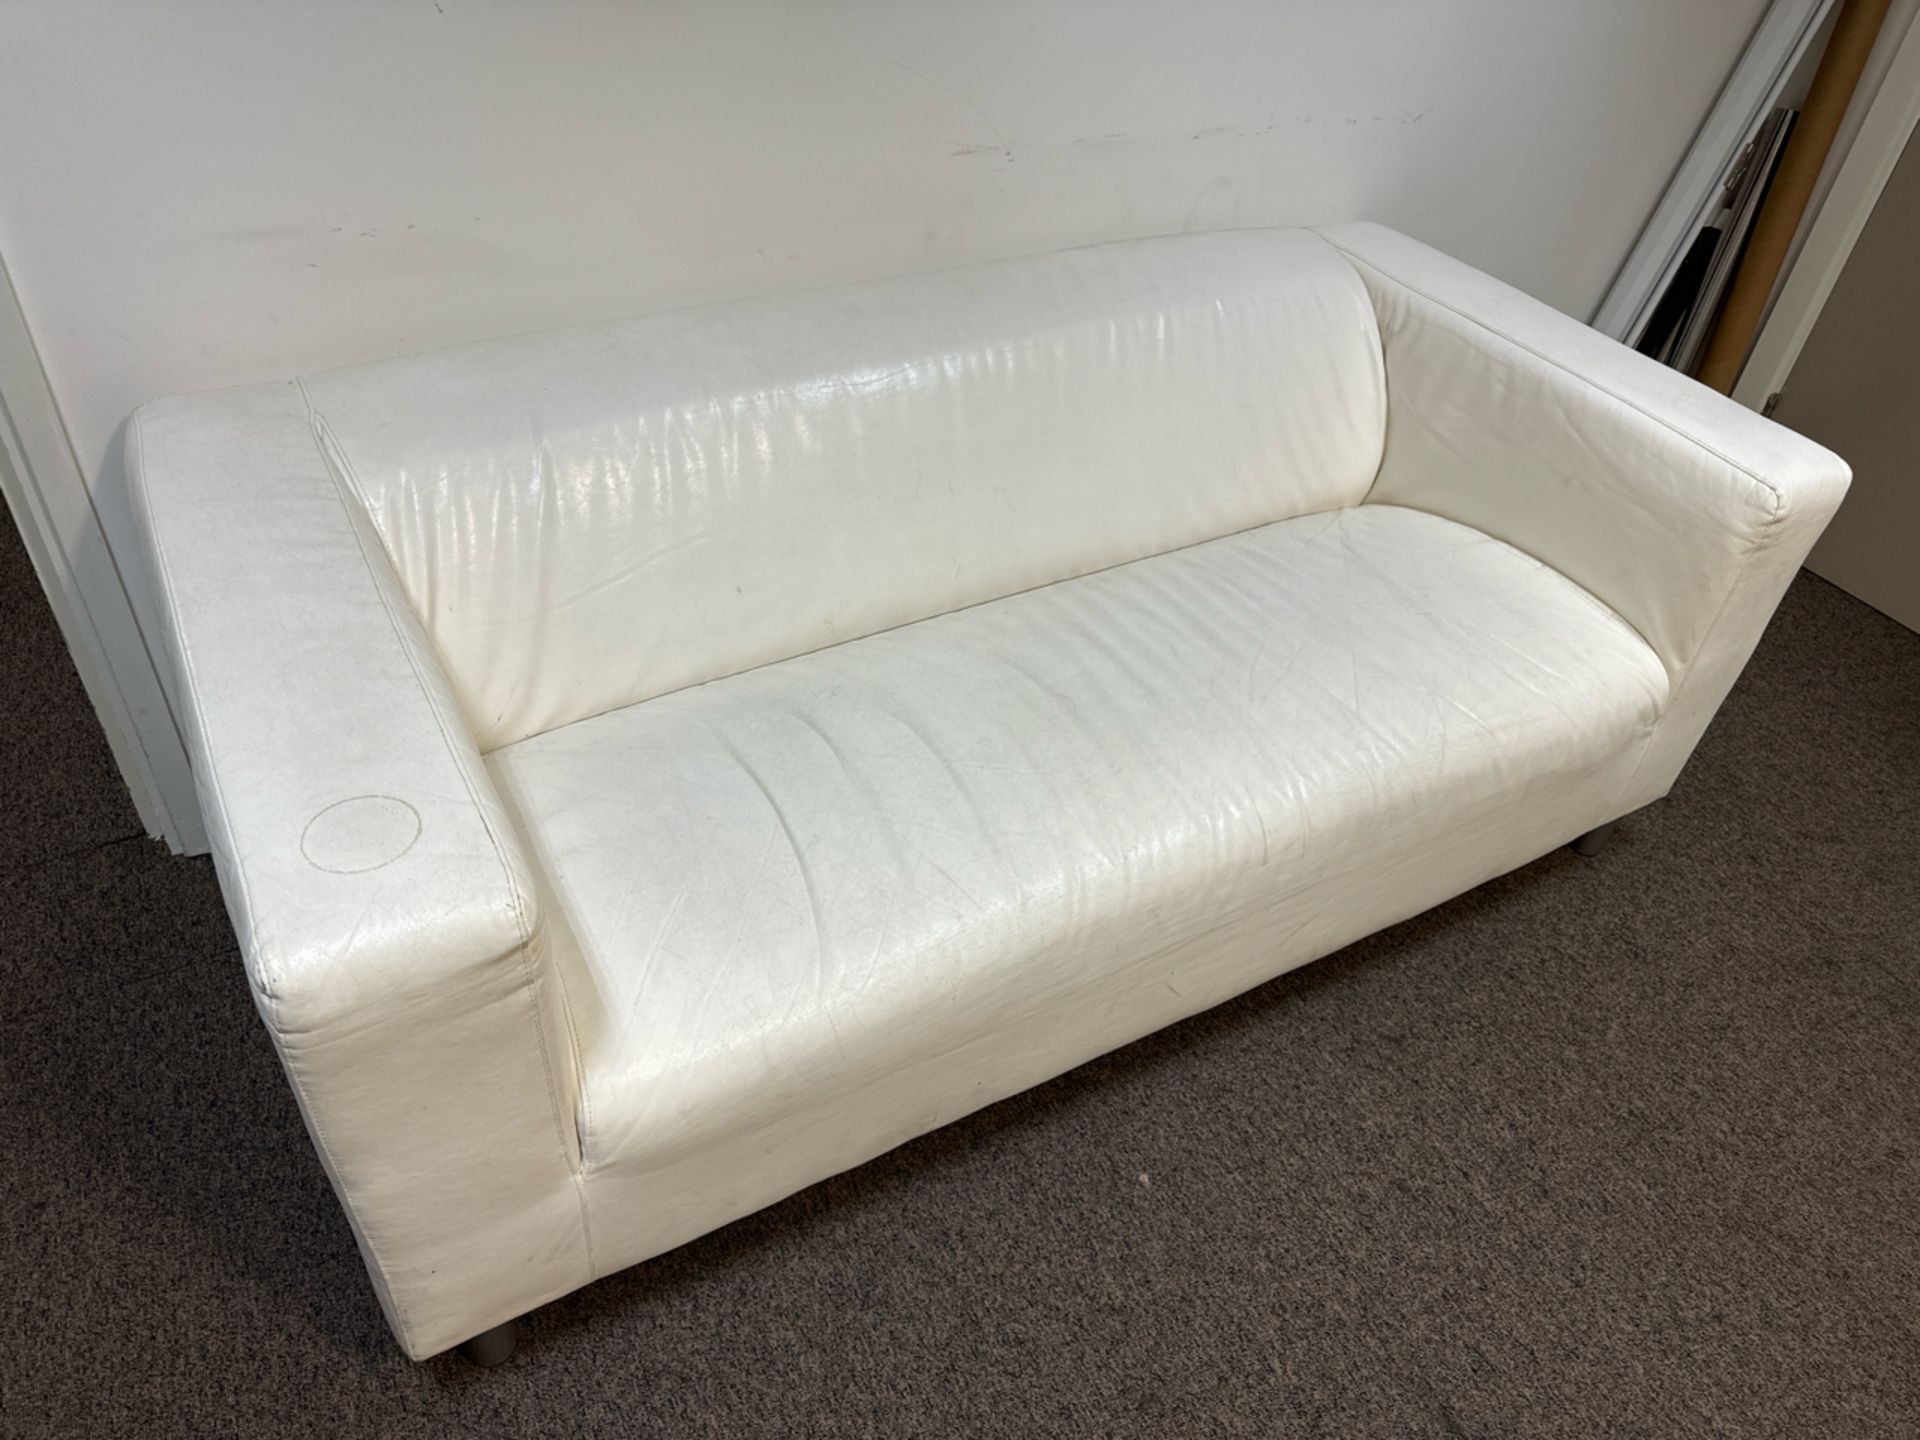 White Leather Look Sofa - Image 2 of 6